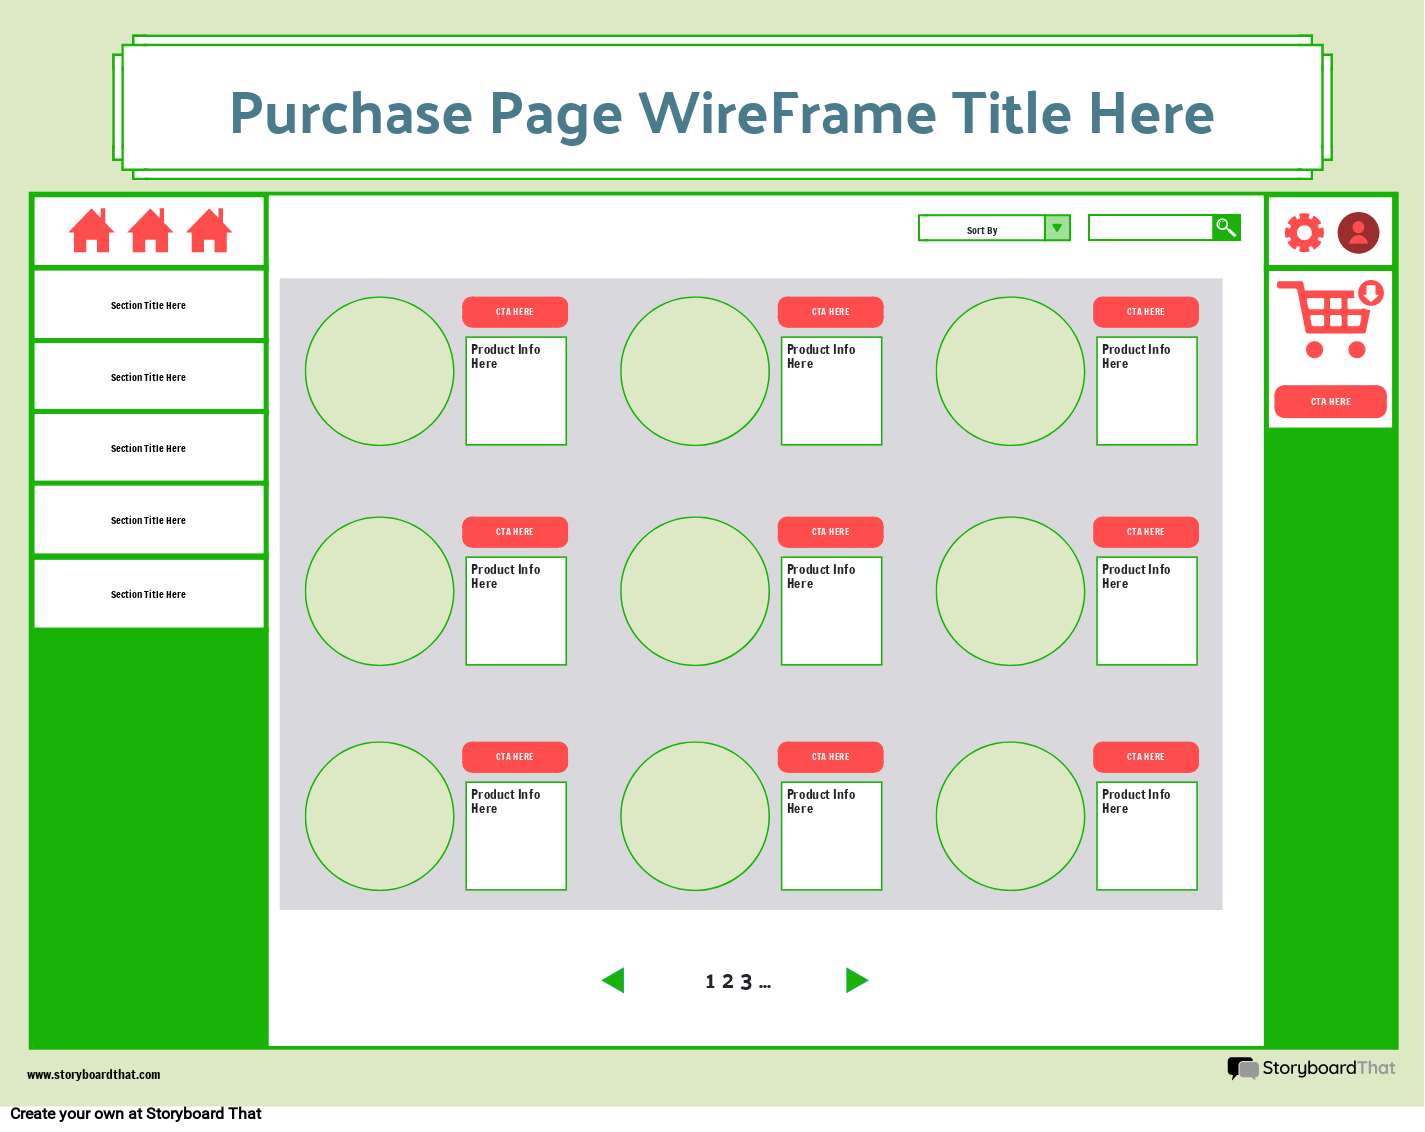 Corporate Purchase Wireframe Template 1